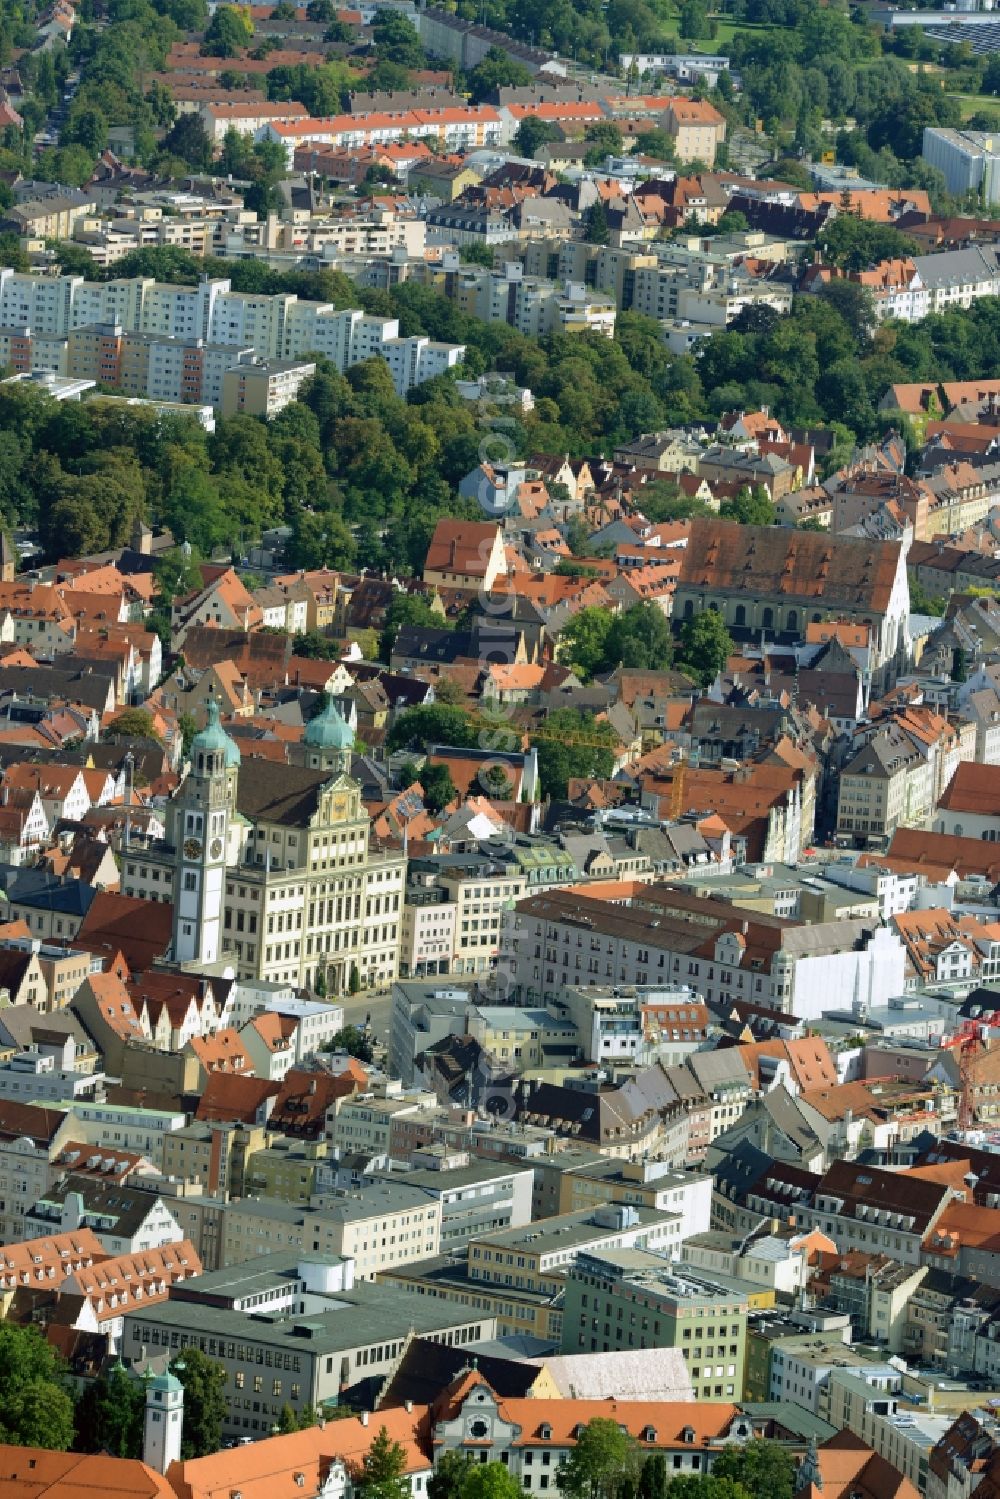 Aerial photograph Augsburg - View of the historic city center of Augsburg in the state of Bavaria. View along Maximilianstrasse. The building with the twin towers is the city hall